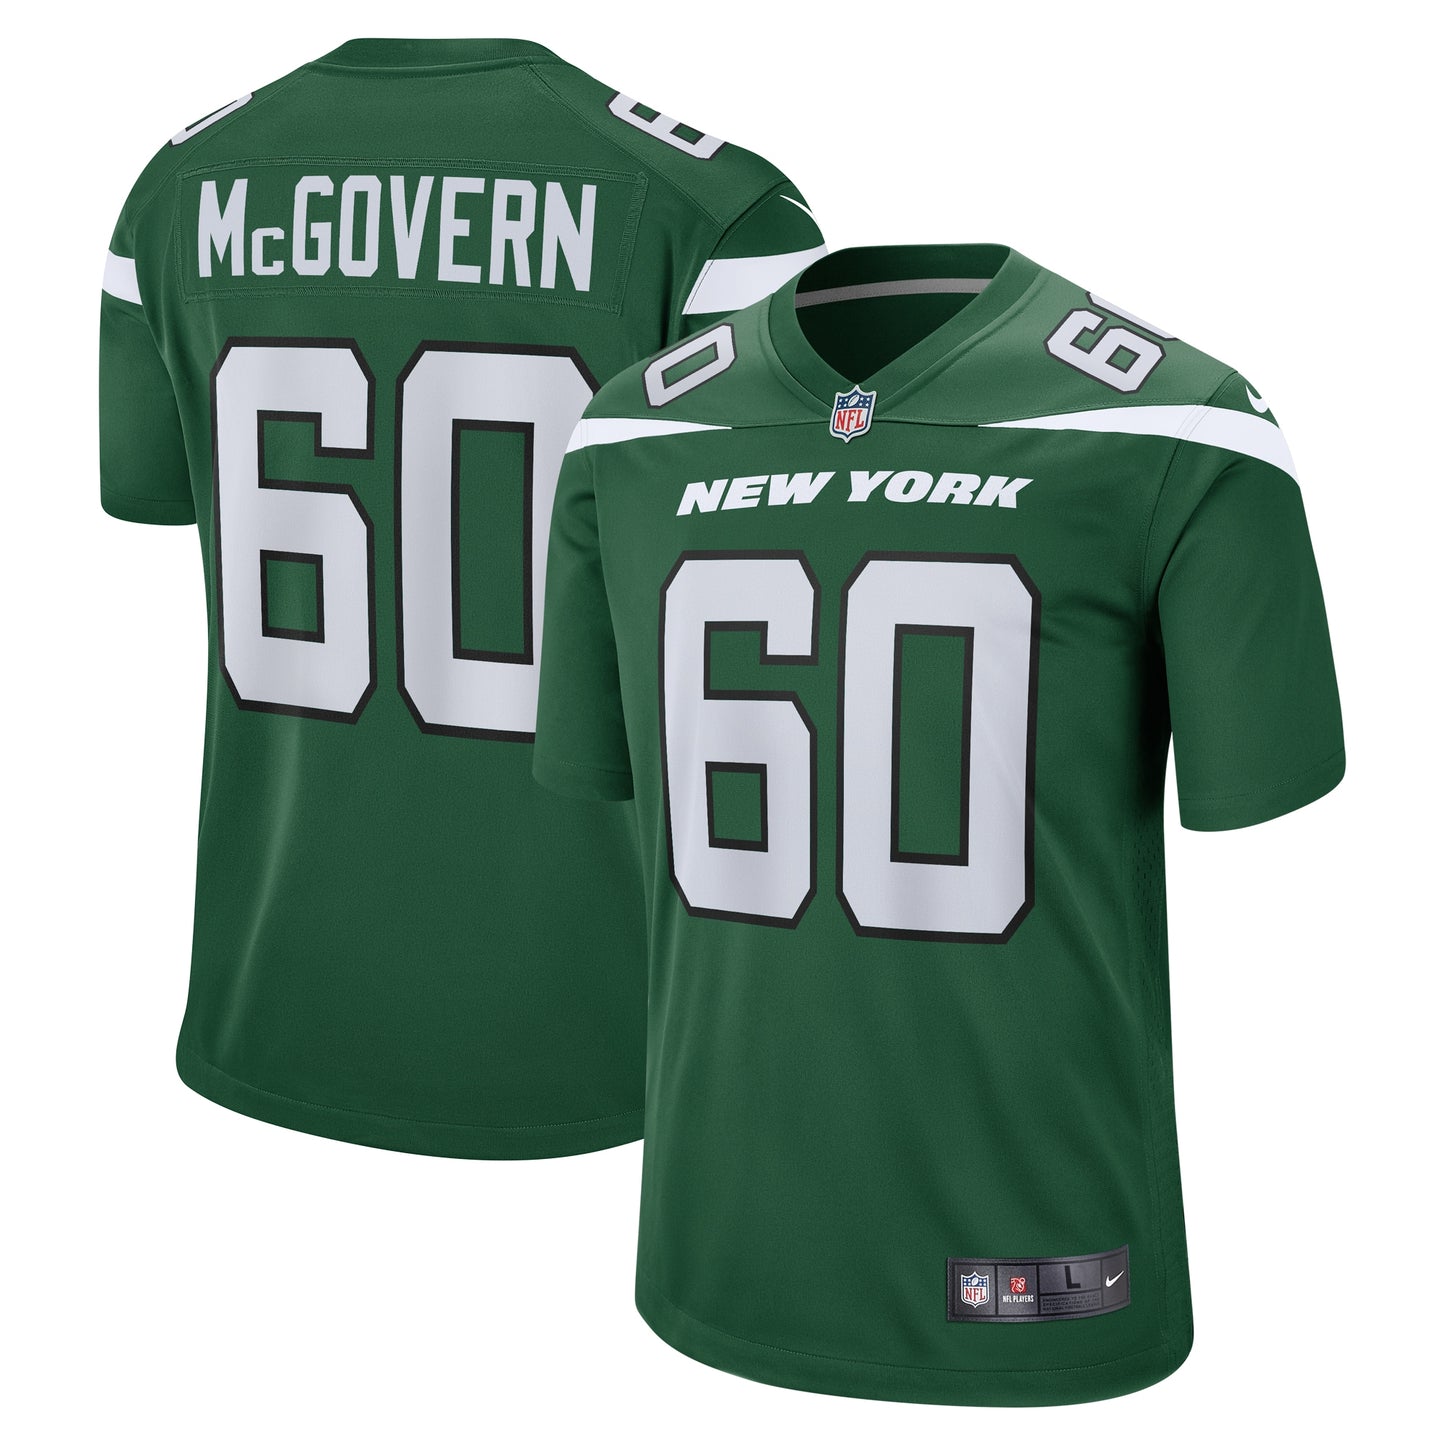 Connor McGovern New York Jets Nike Game Jersey - Gotham Green